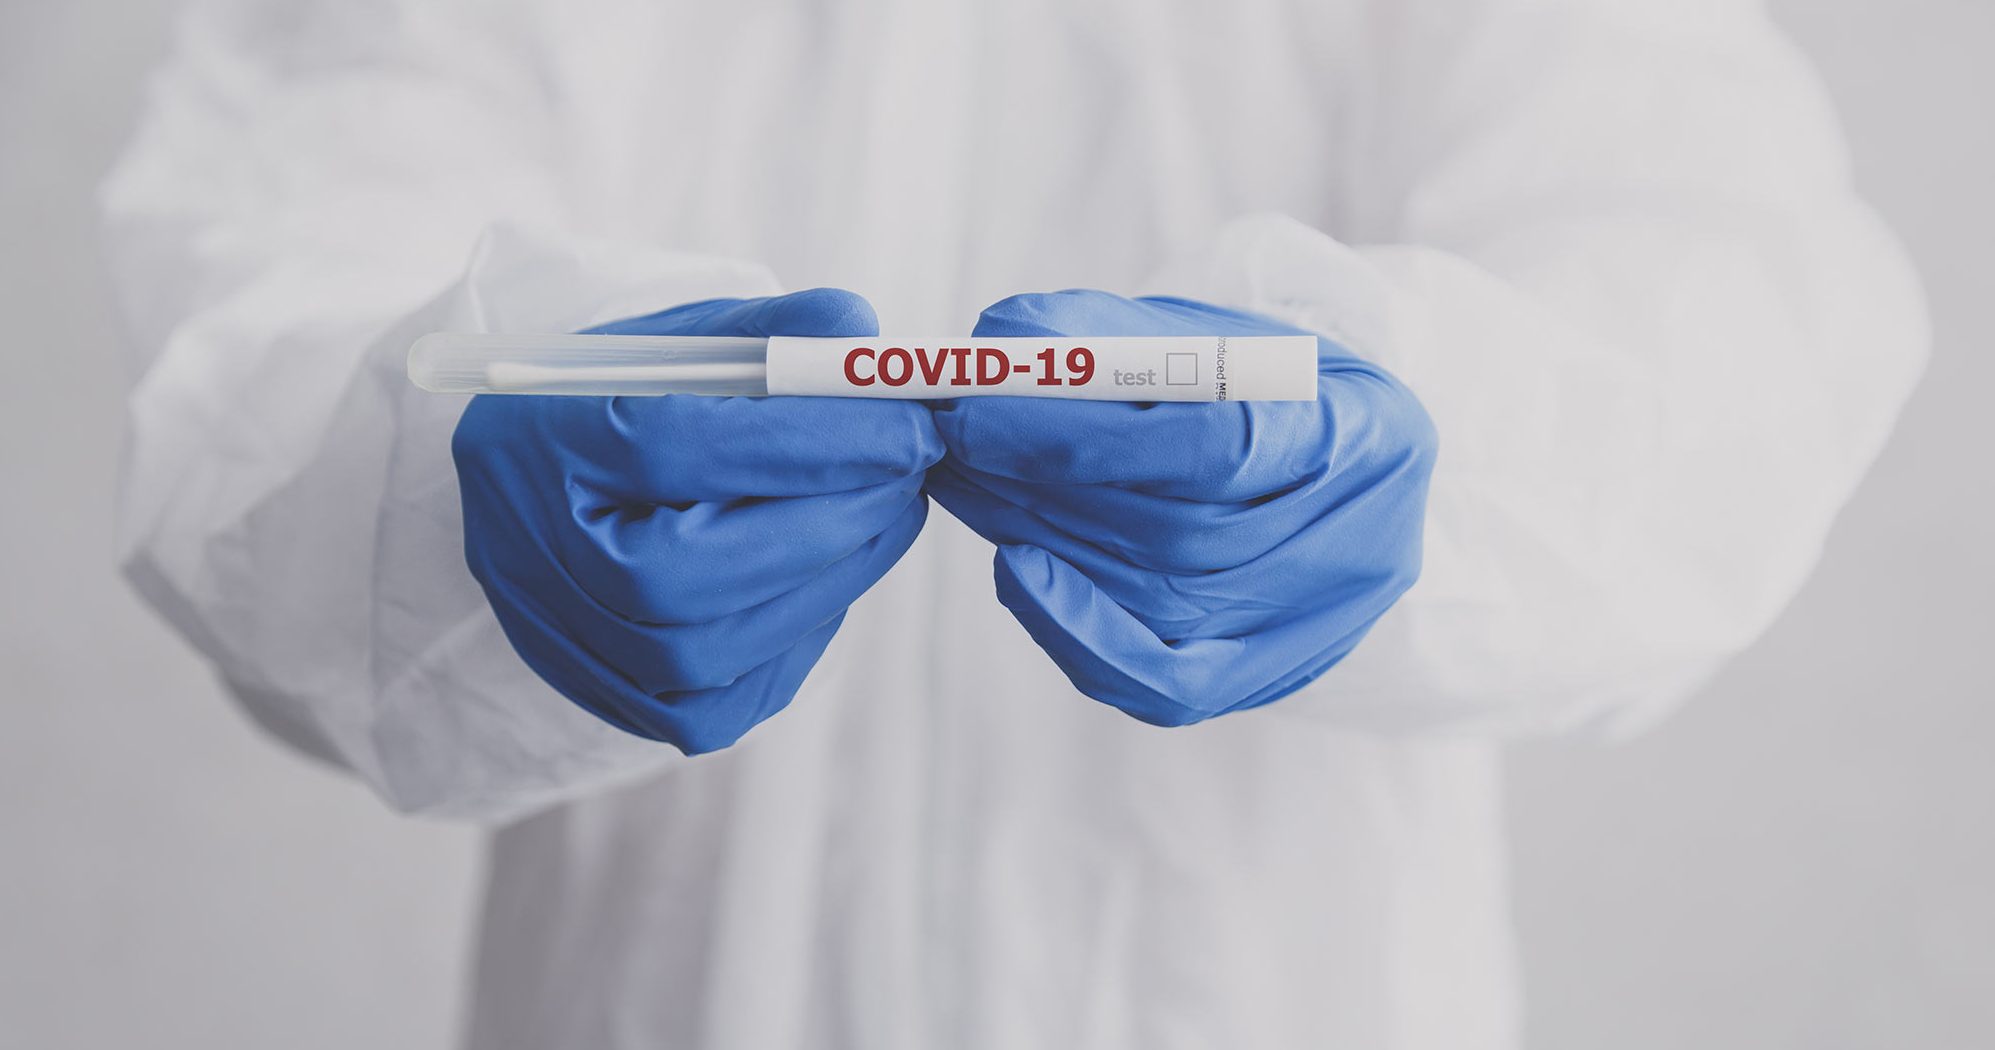 A poll carried out by the BDA shows that UDCs are reporting a shortage of PPE in the face of coronavirus